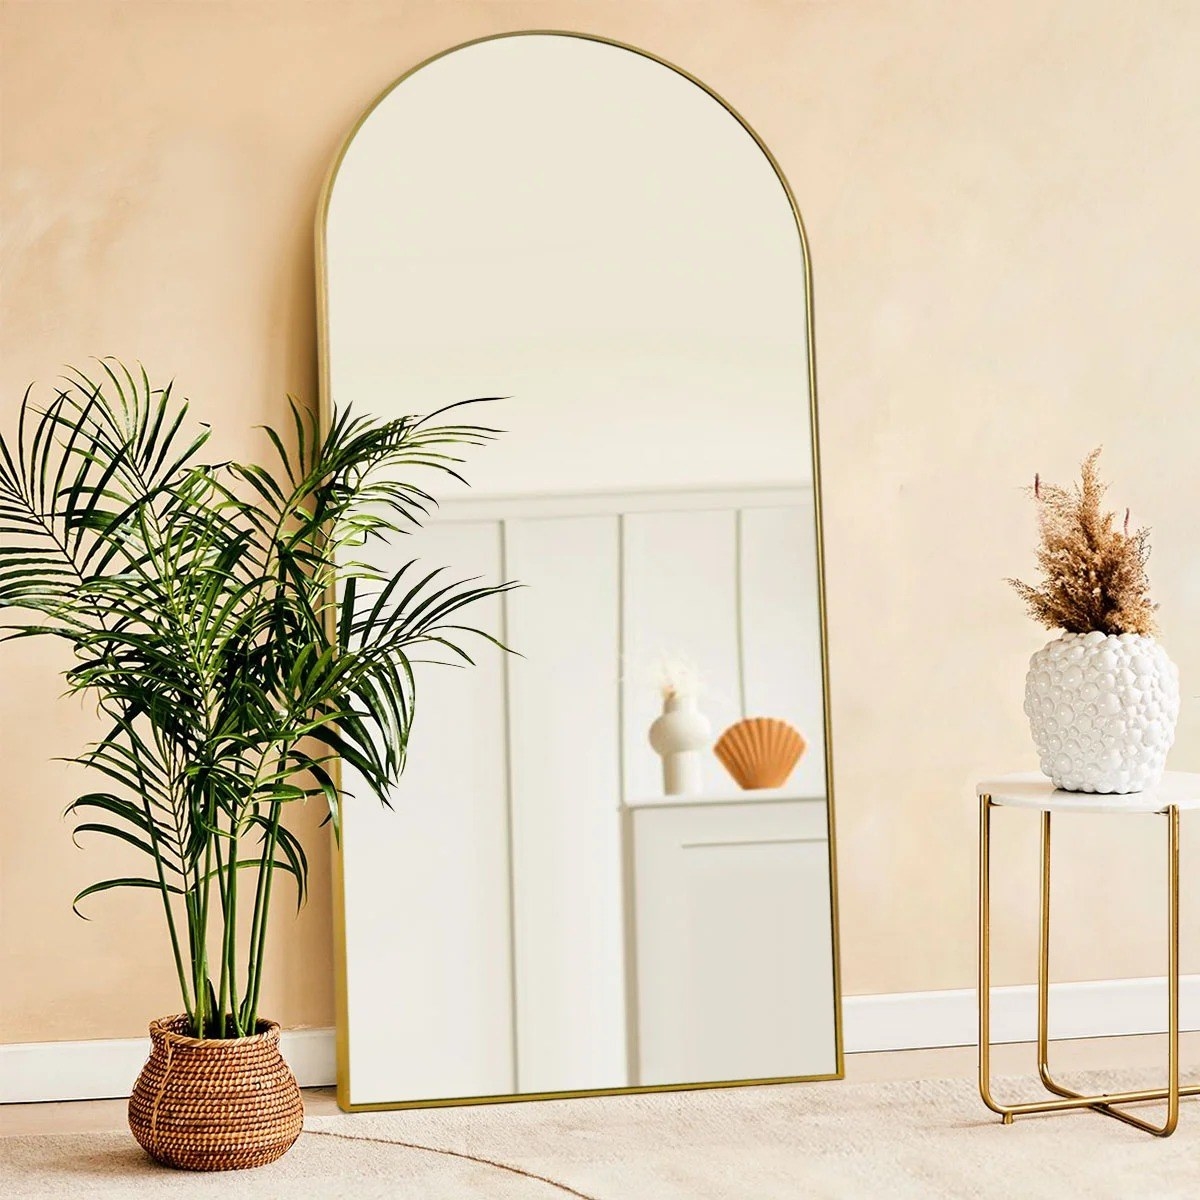 The large arched mirror with a gold frame leaning against a wall